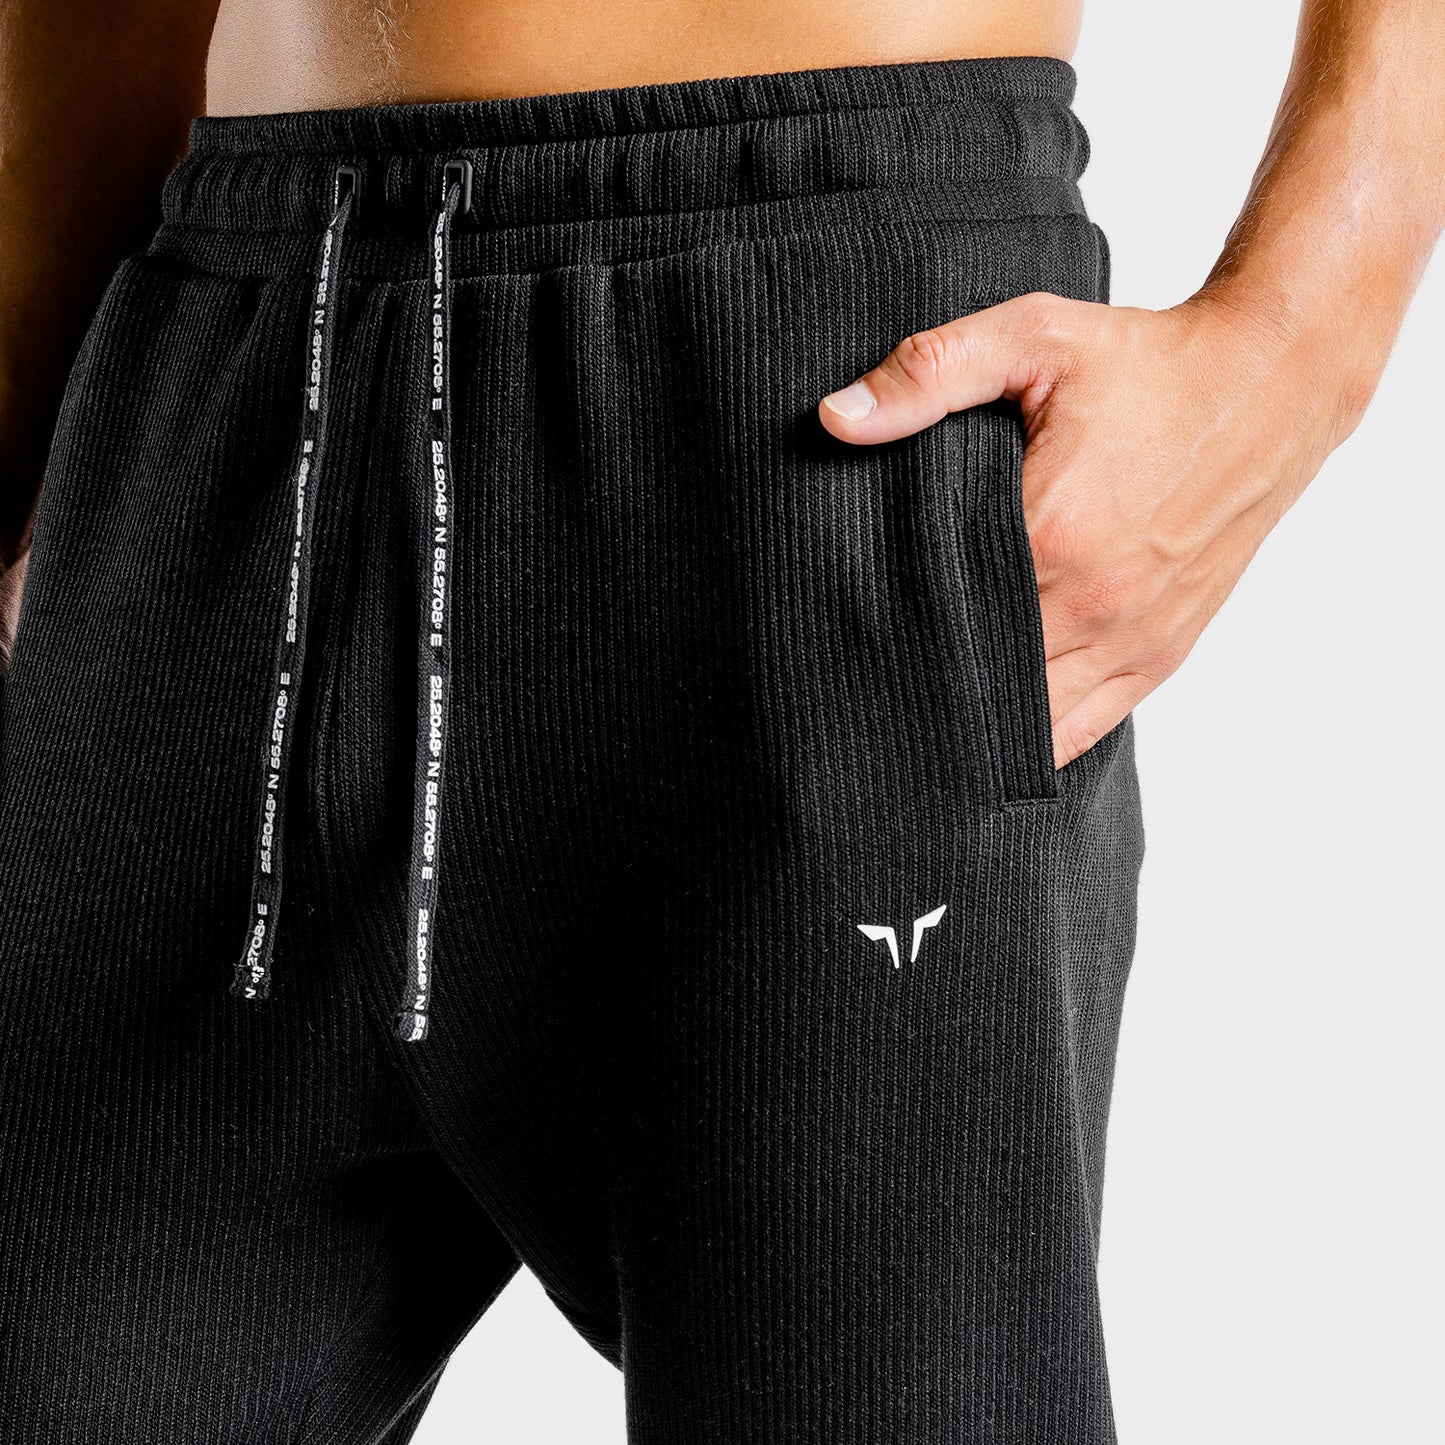 squatwolf-gym-wear-luxe-joggers-black-workout-pants-for-men